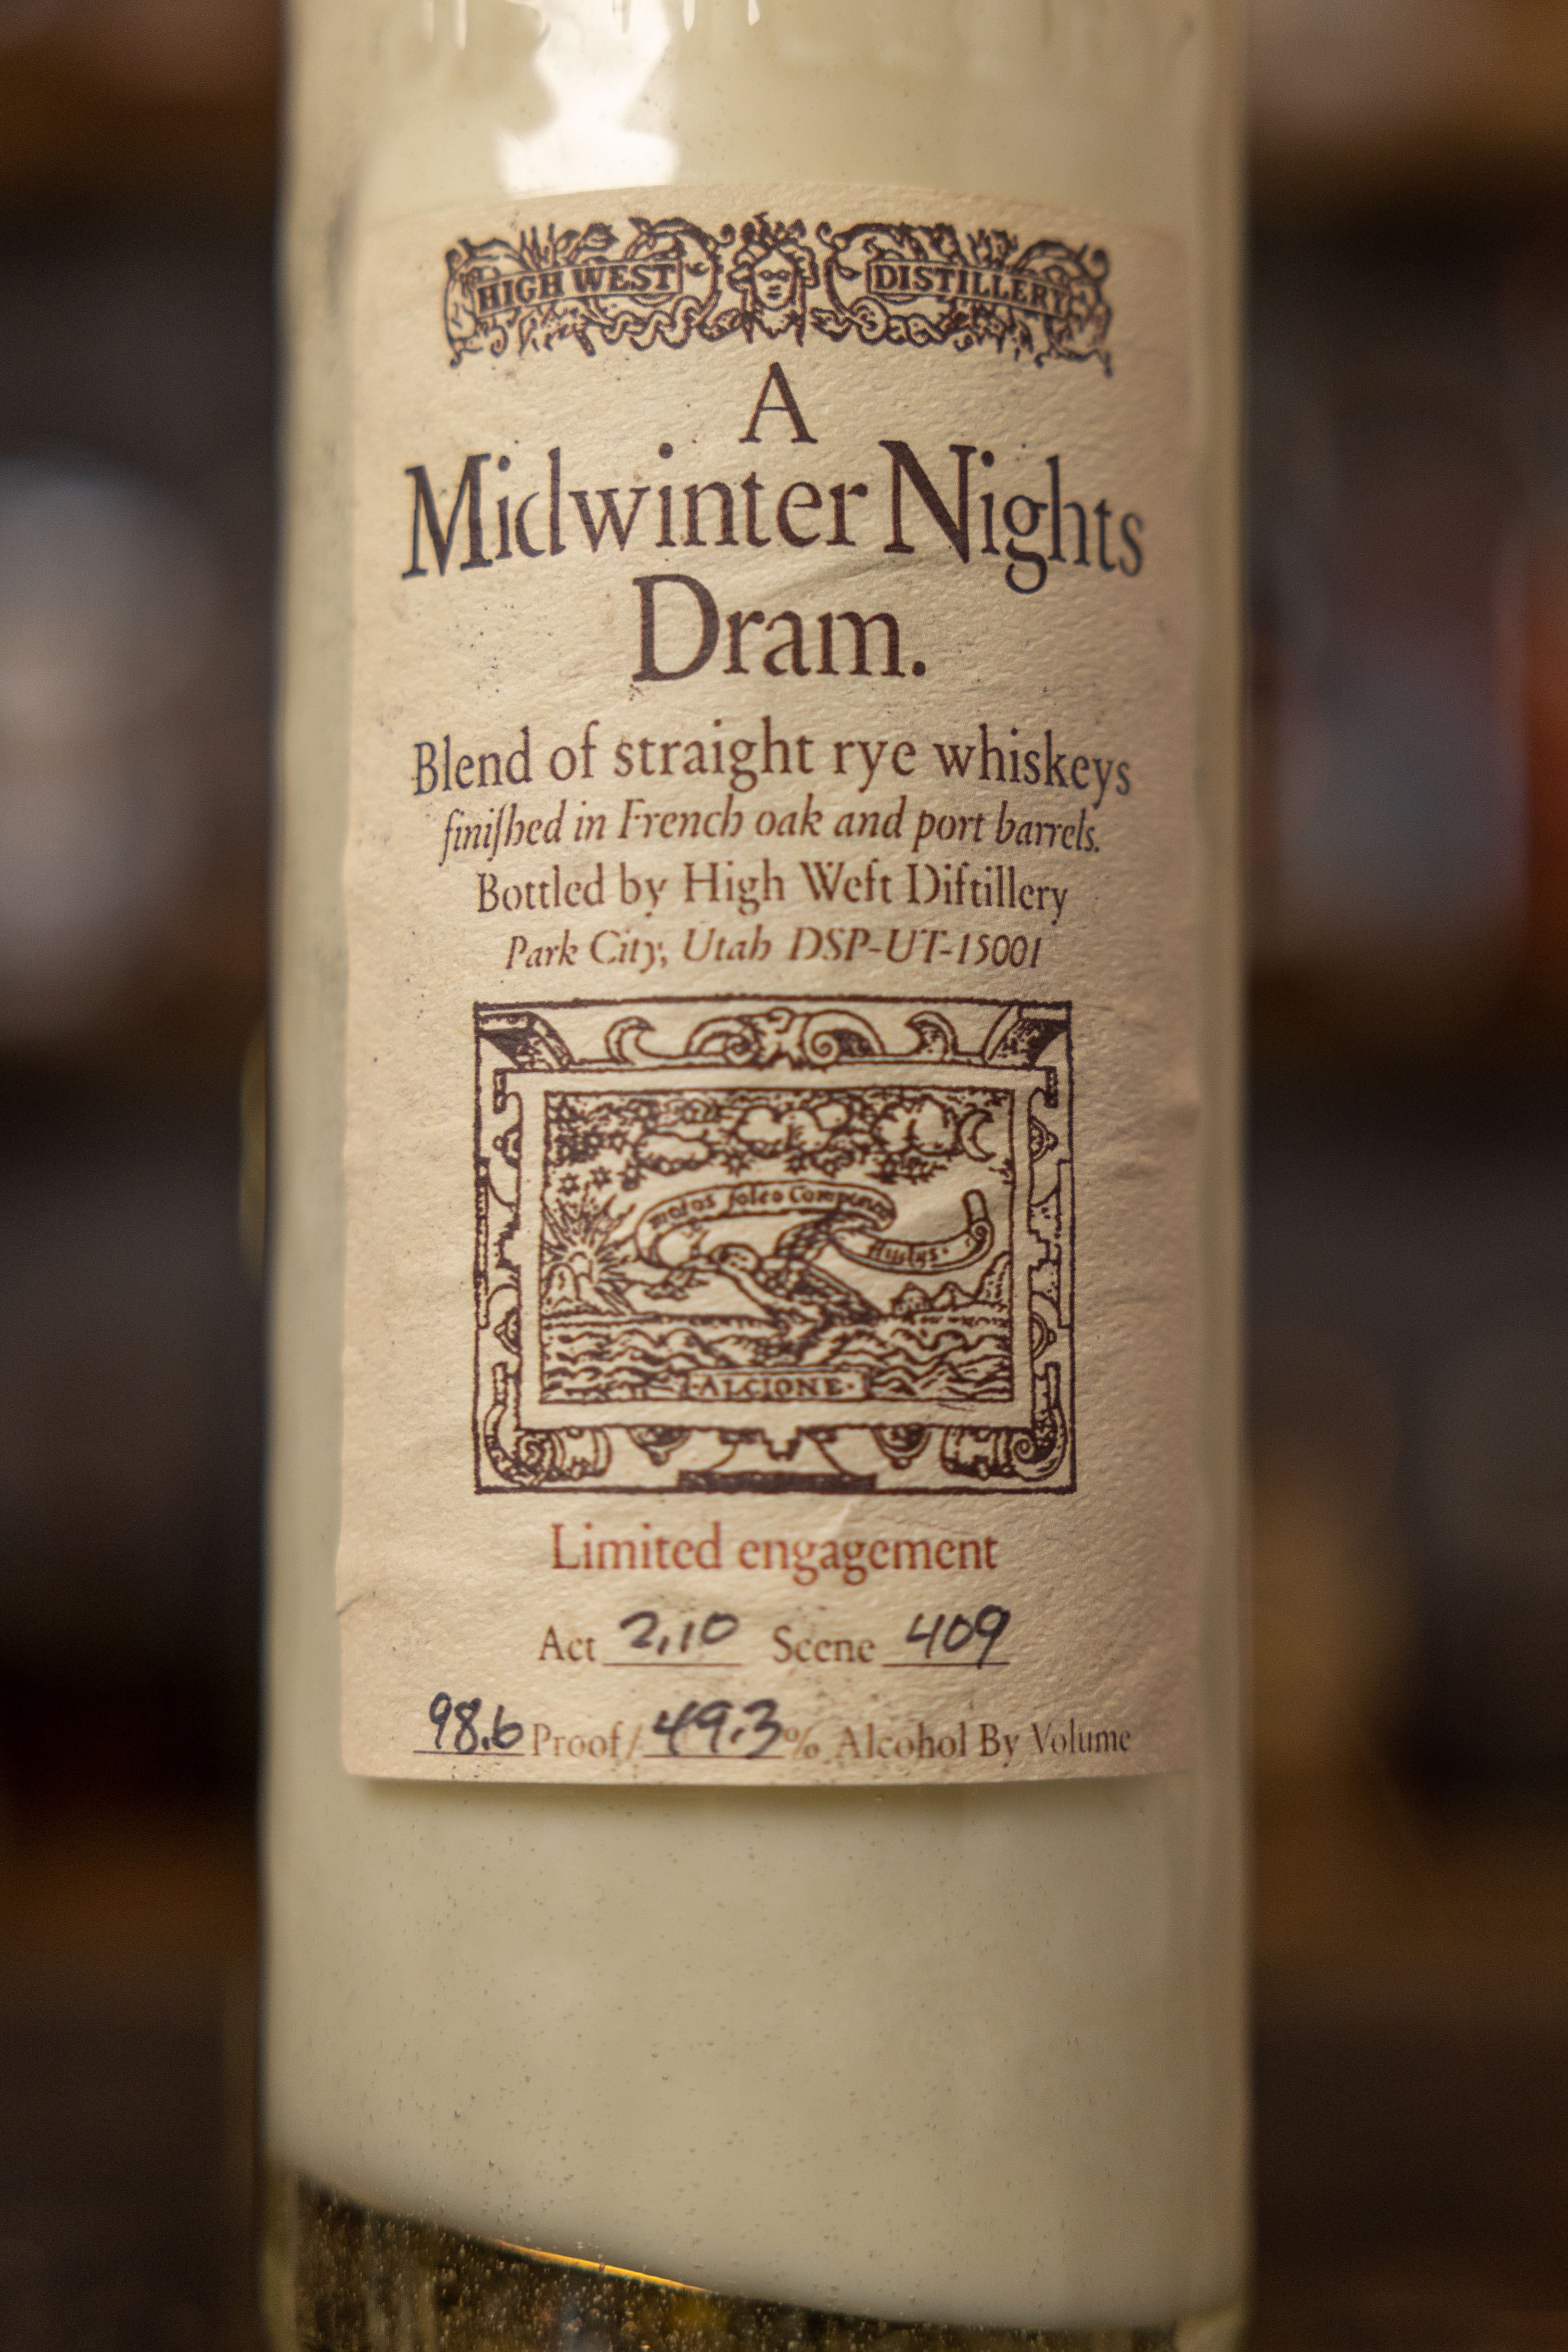 High West "A Midwinter Night's Dram" Bottle Candle